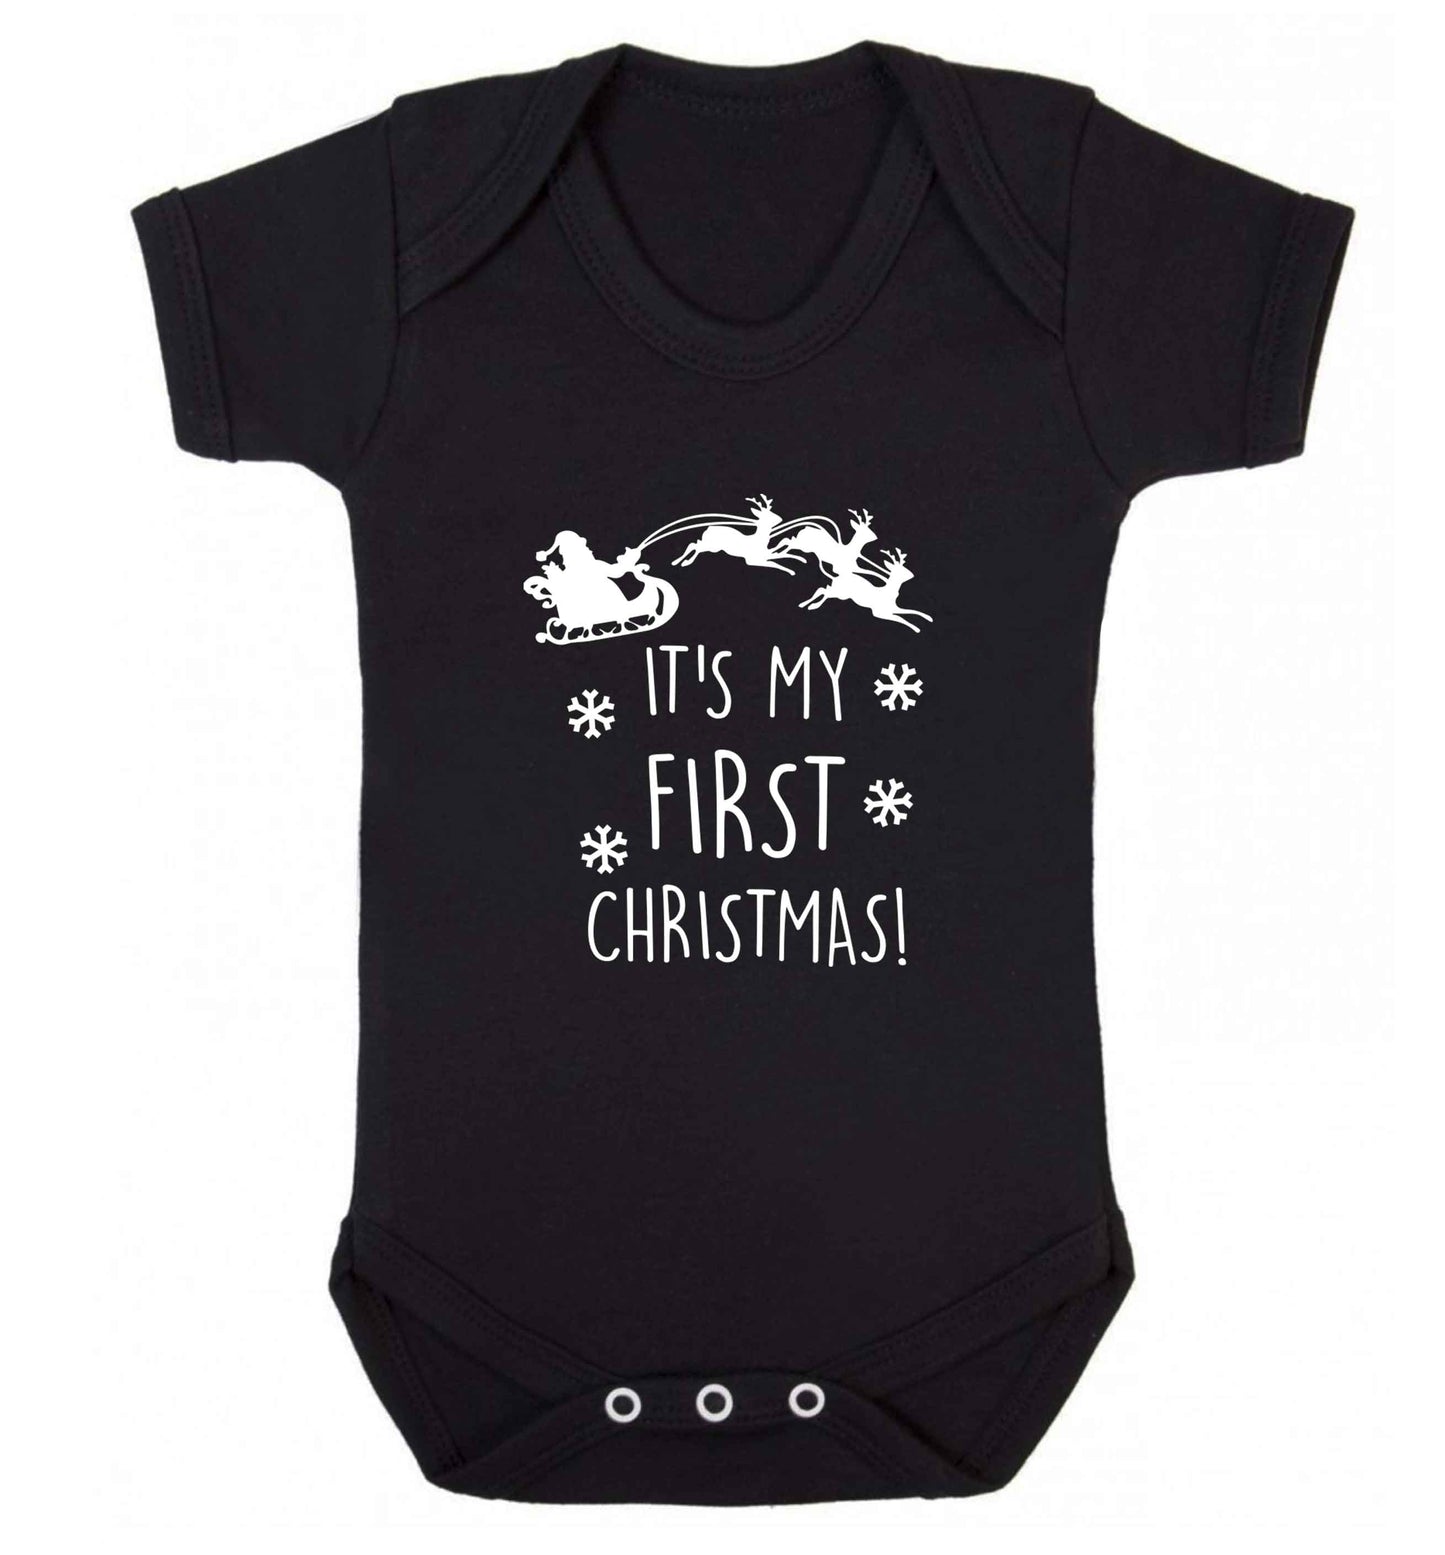 It's my first Christmas - Santa sleigh text baby vest black 18-24 months